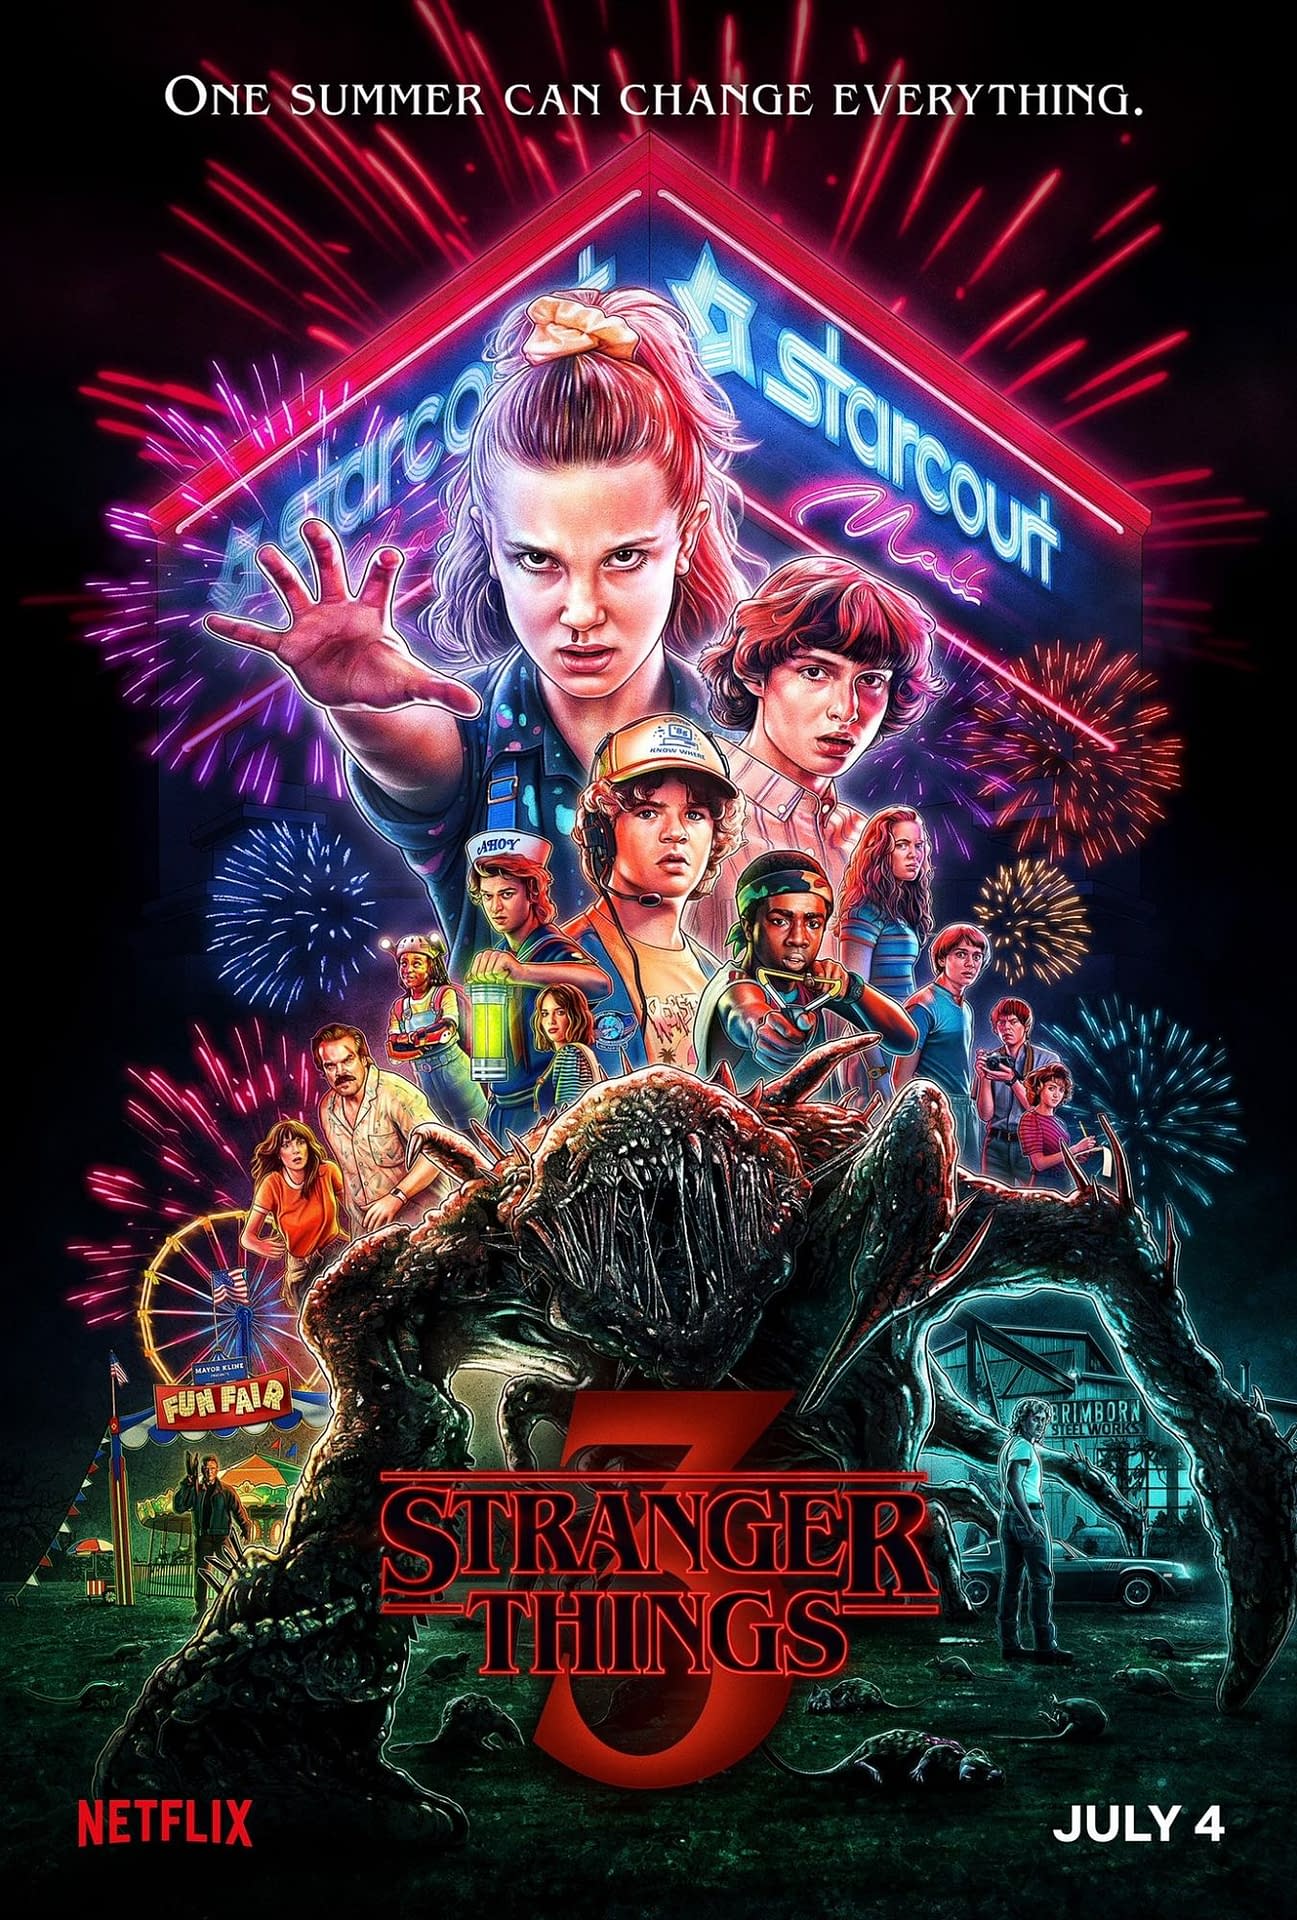 "Stranger Things 3": Netflix Cares About the Quality of Your Mid-Binge Break [VIDEO]